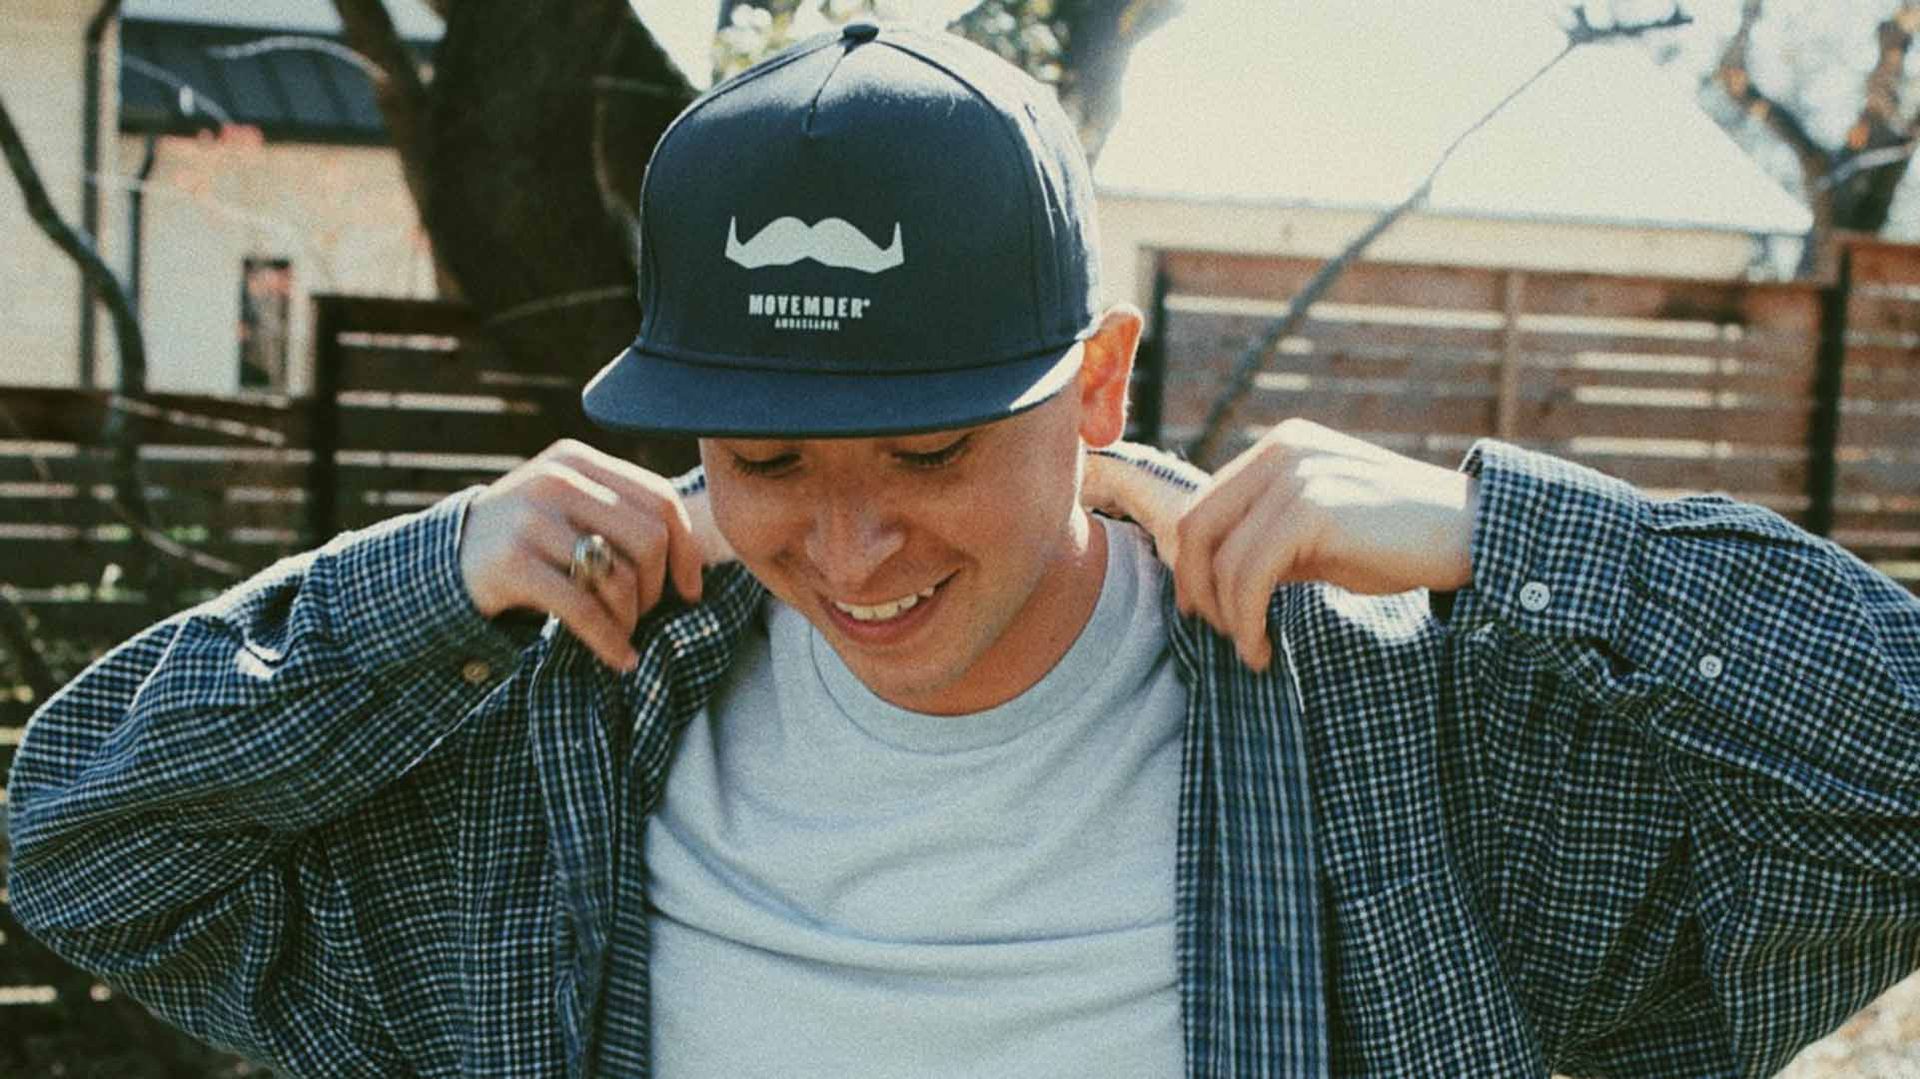 Young man smiling to camera, wearing a Movember-branded cap.